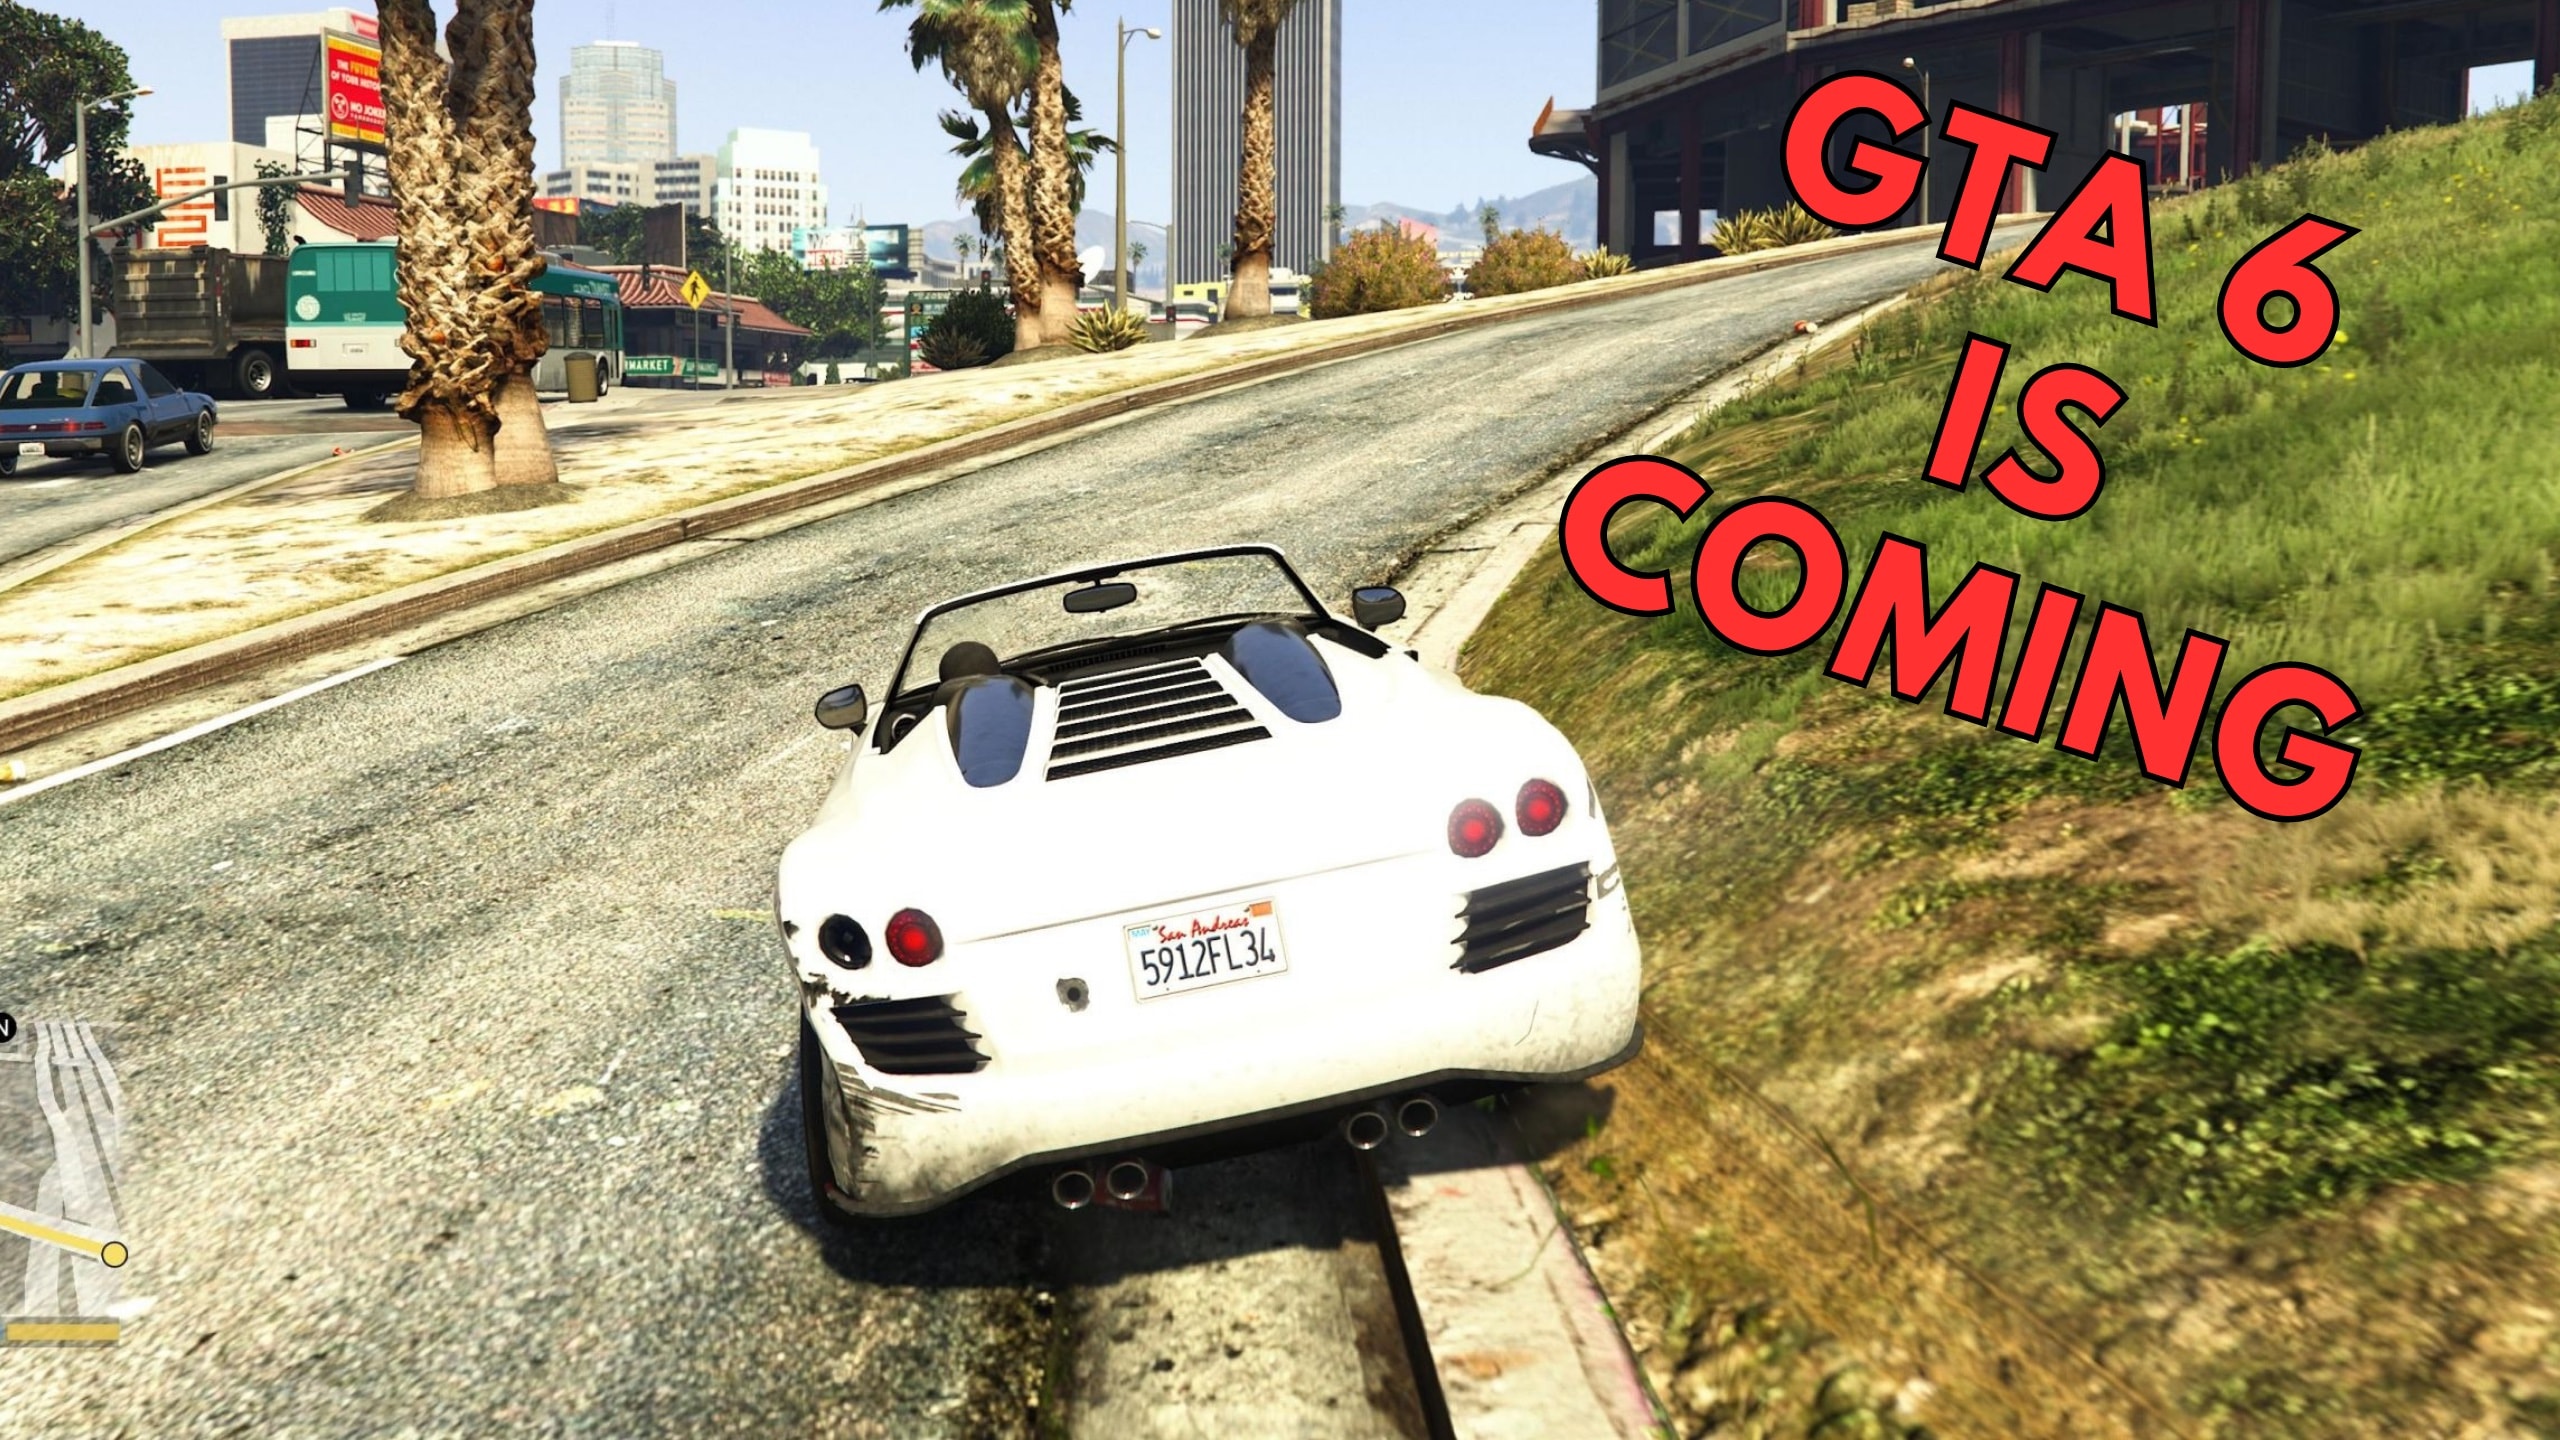 GTA VI trailer to debut in December. Here's what to know.